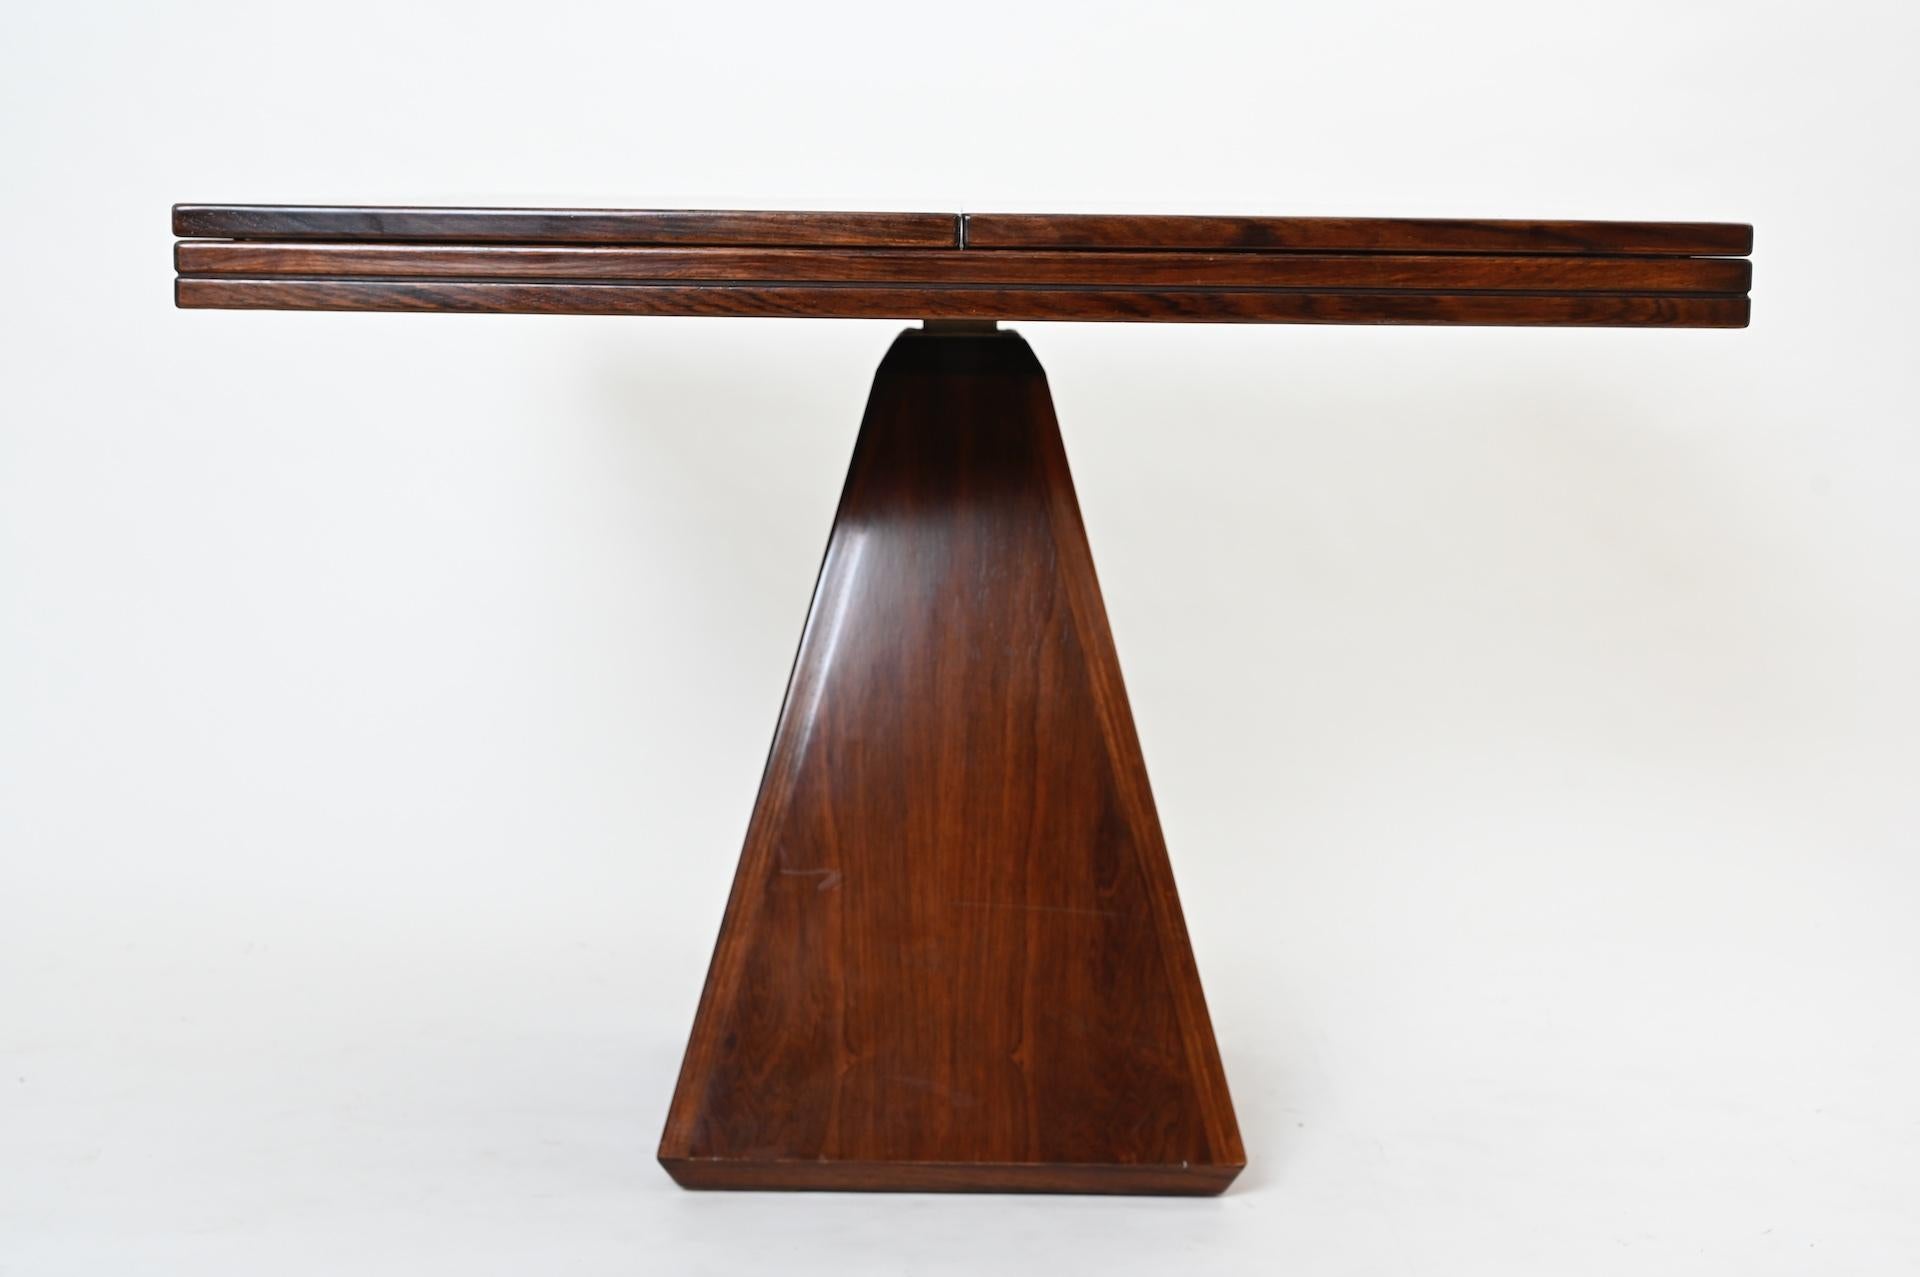 The extendable dining table model 'Chelsea', by Vittorio Introini, Italy, circa 1960. 

Wonderfully designed for Saporiti the table folds out from a square of 100cm x 100cm to 200cm length

In excellent condition and sympathetically restored.